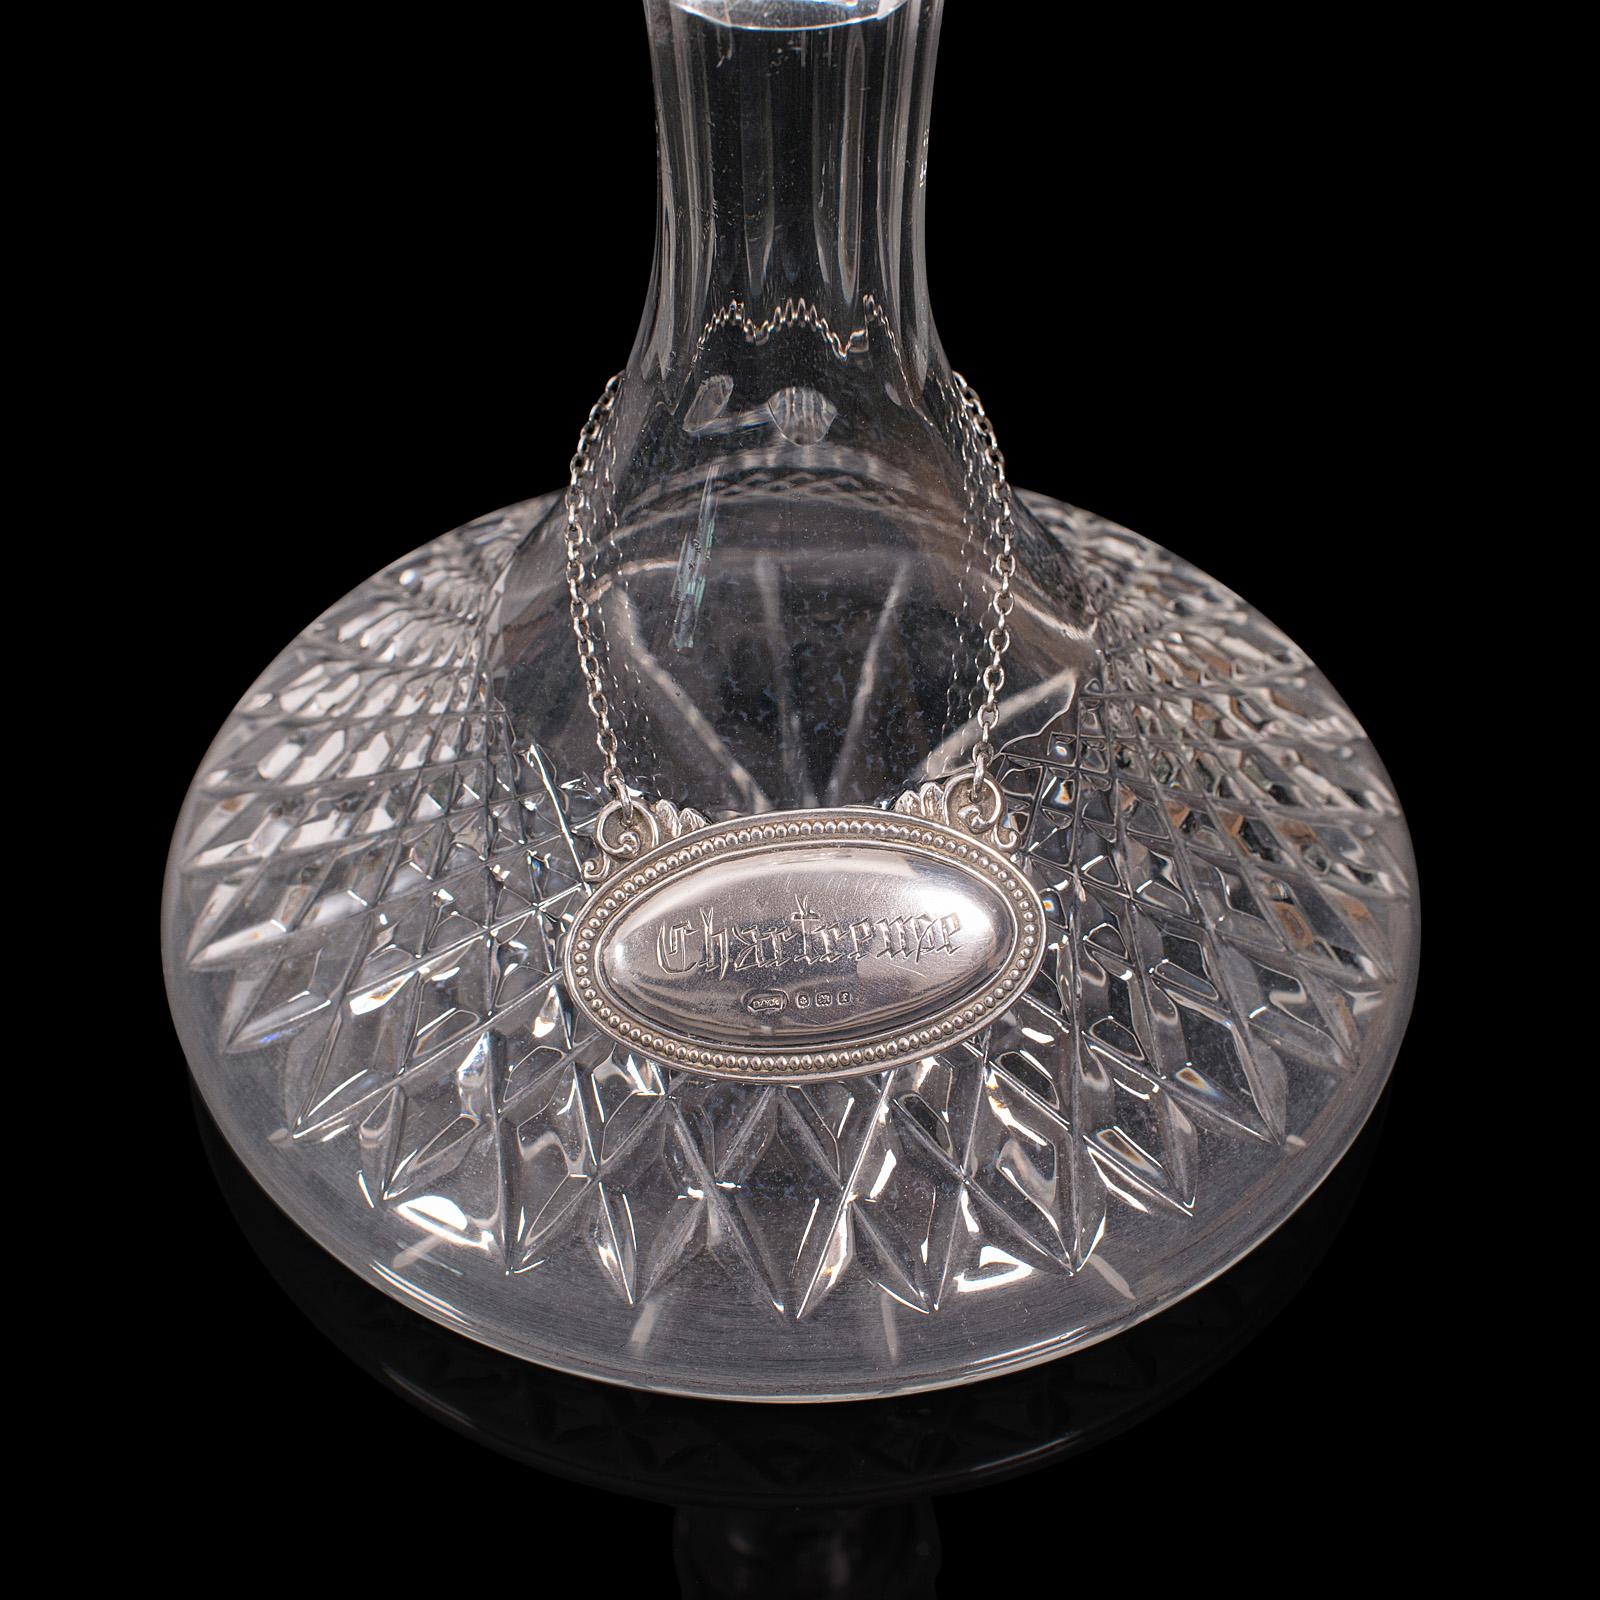 Pair of Vintage Decanters, English Glass, Spirit Vessel, Silver Labels, Hallmark For Sale 2